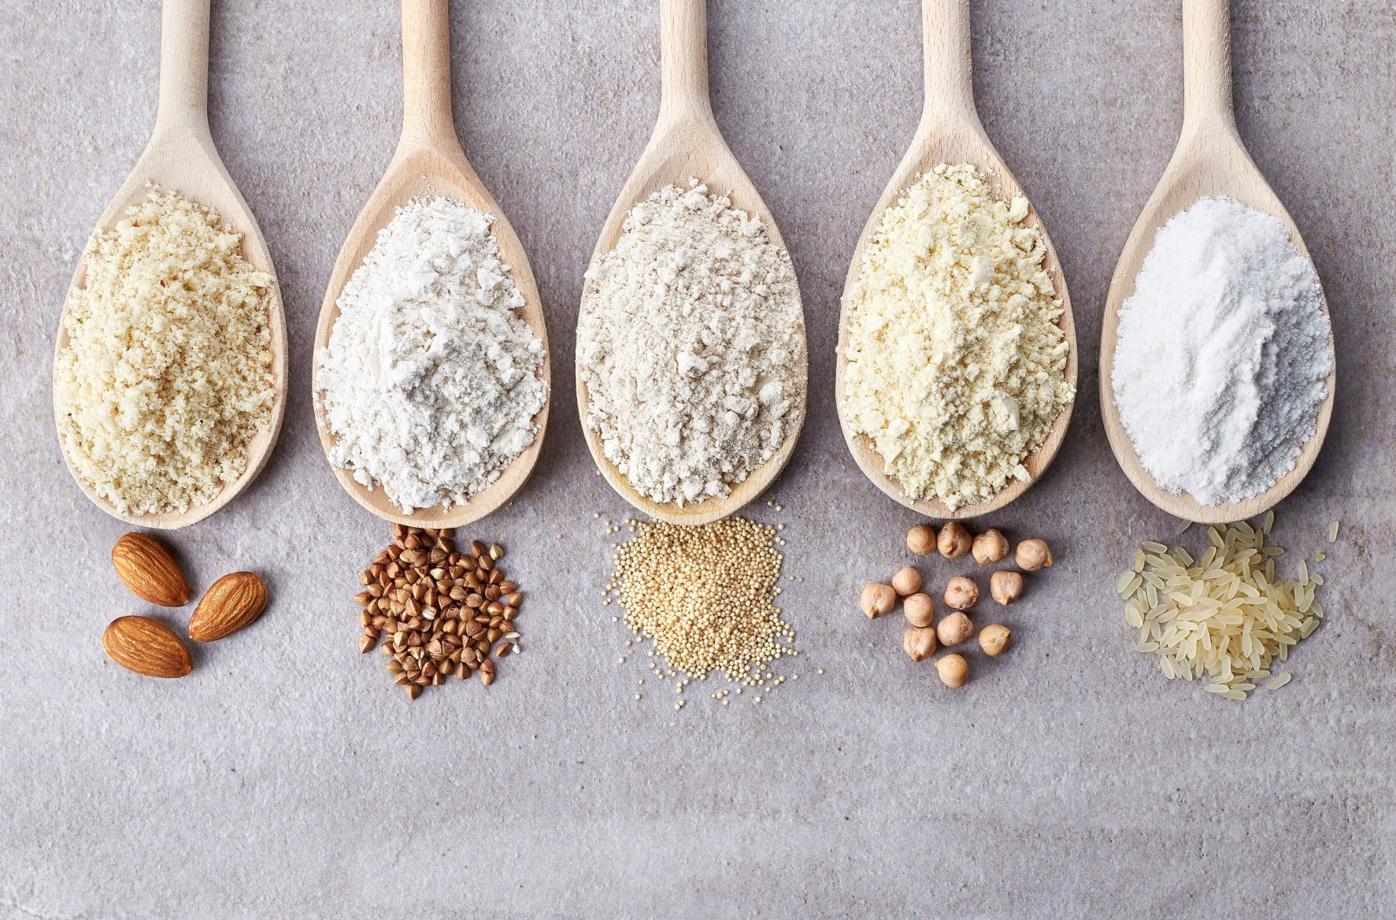 Flour power: There are lots of choices beyond wheat for baking, cooking [recipes, tips]. Life & Culture